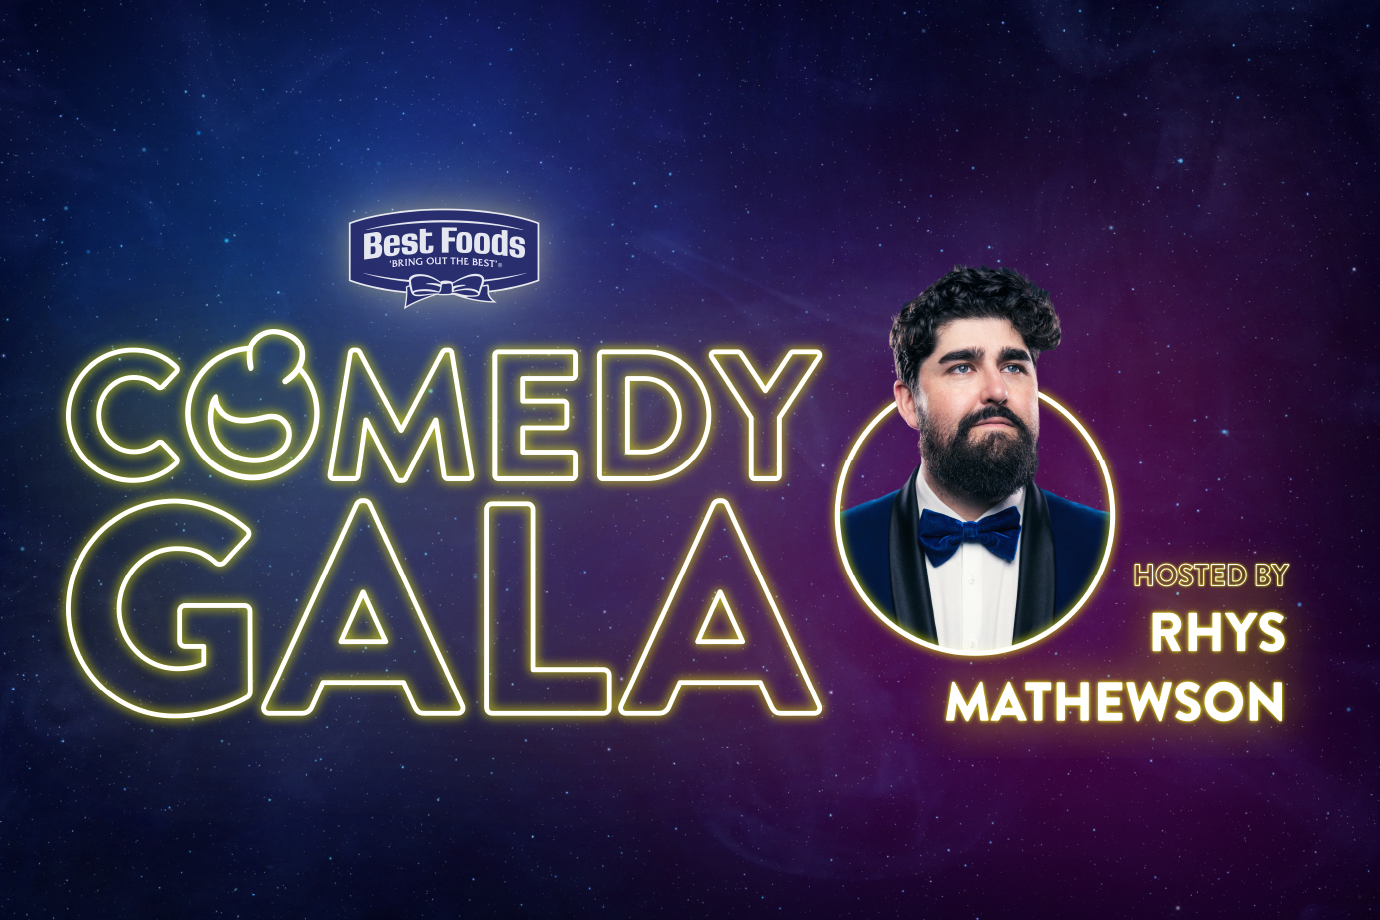 Comedians announced for Best Foods Comedy Gala!